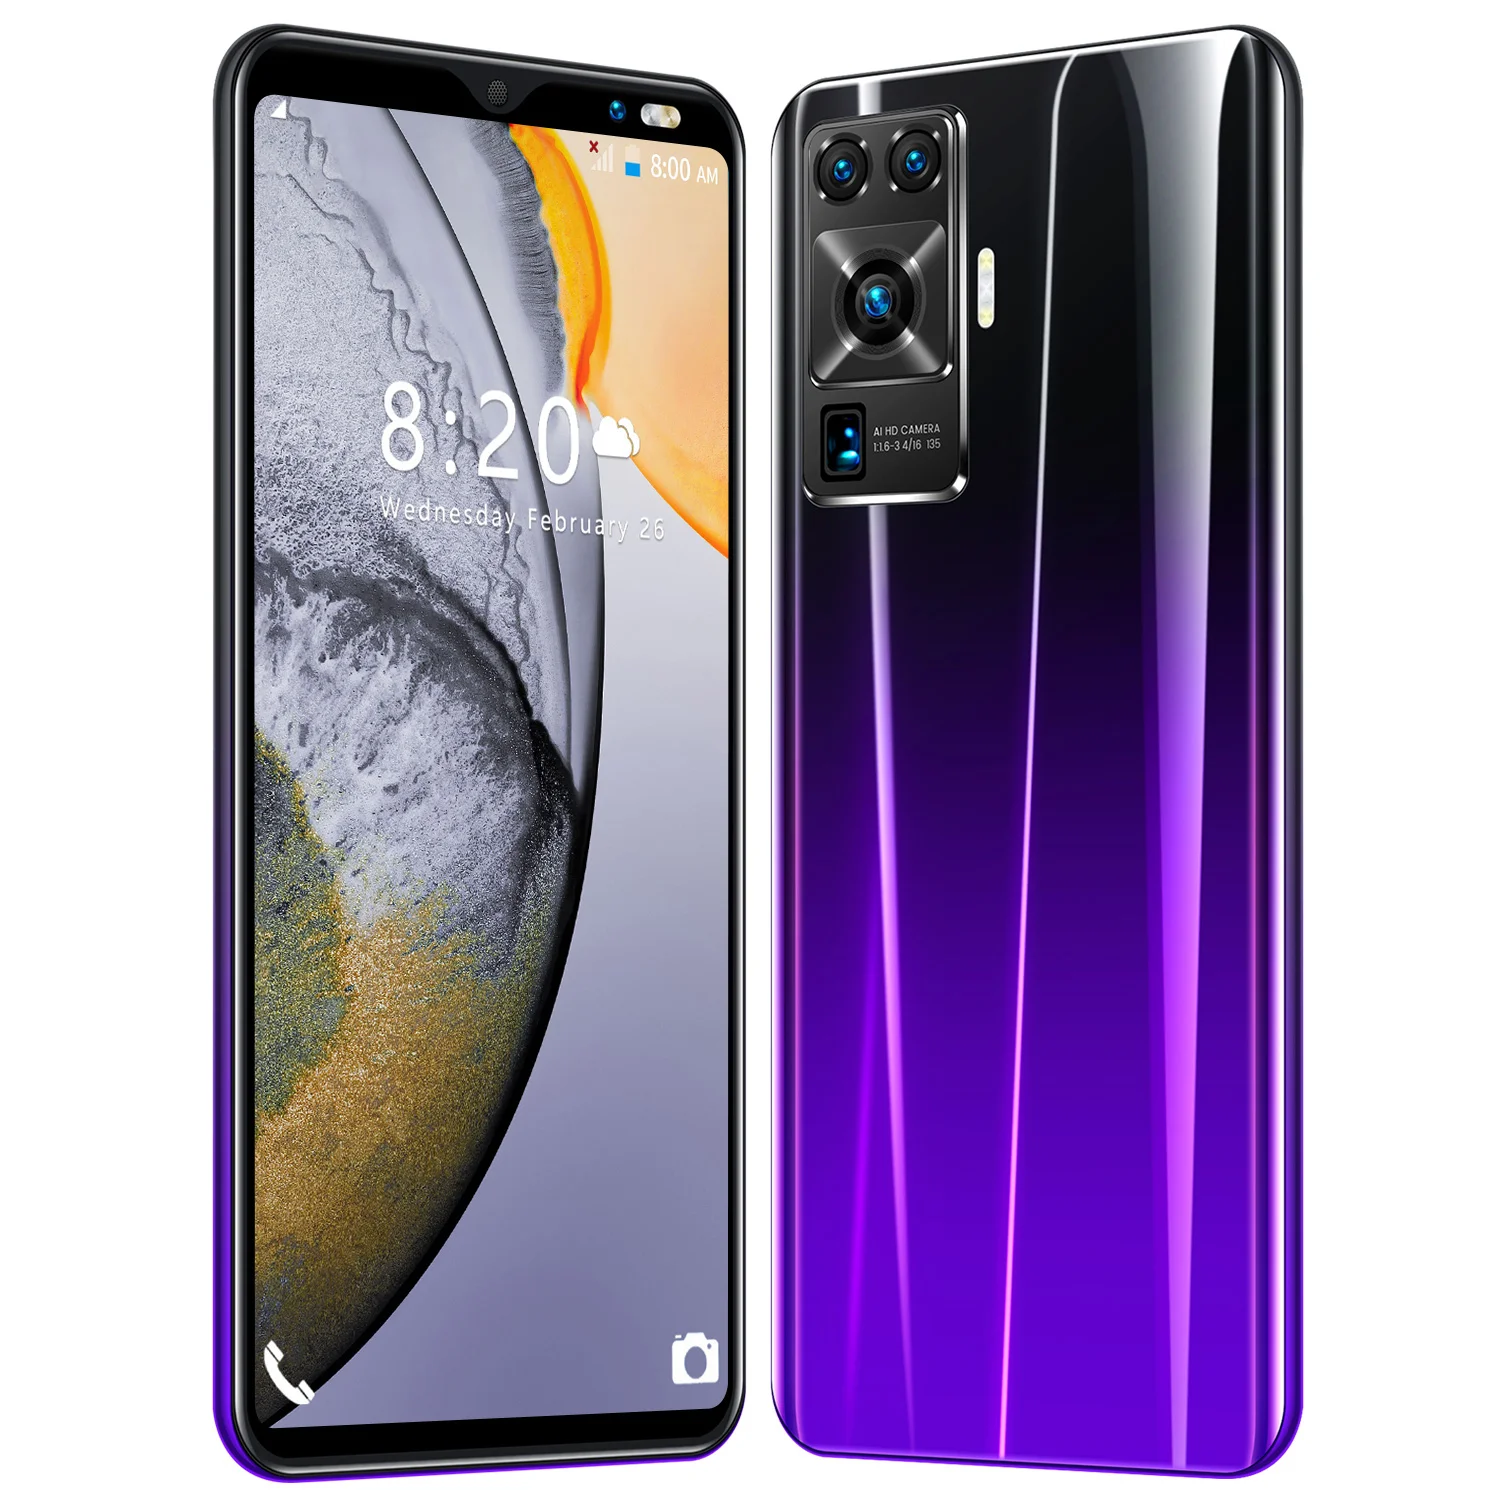 

Global Version New 5.5Inch Smartphone X50mini Cellphone 4 64GB ROM Celulares Android9.1 Mobile Phones Wifi WCDMA 4800mAh